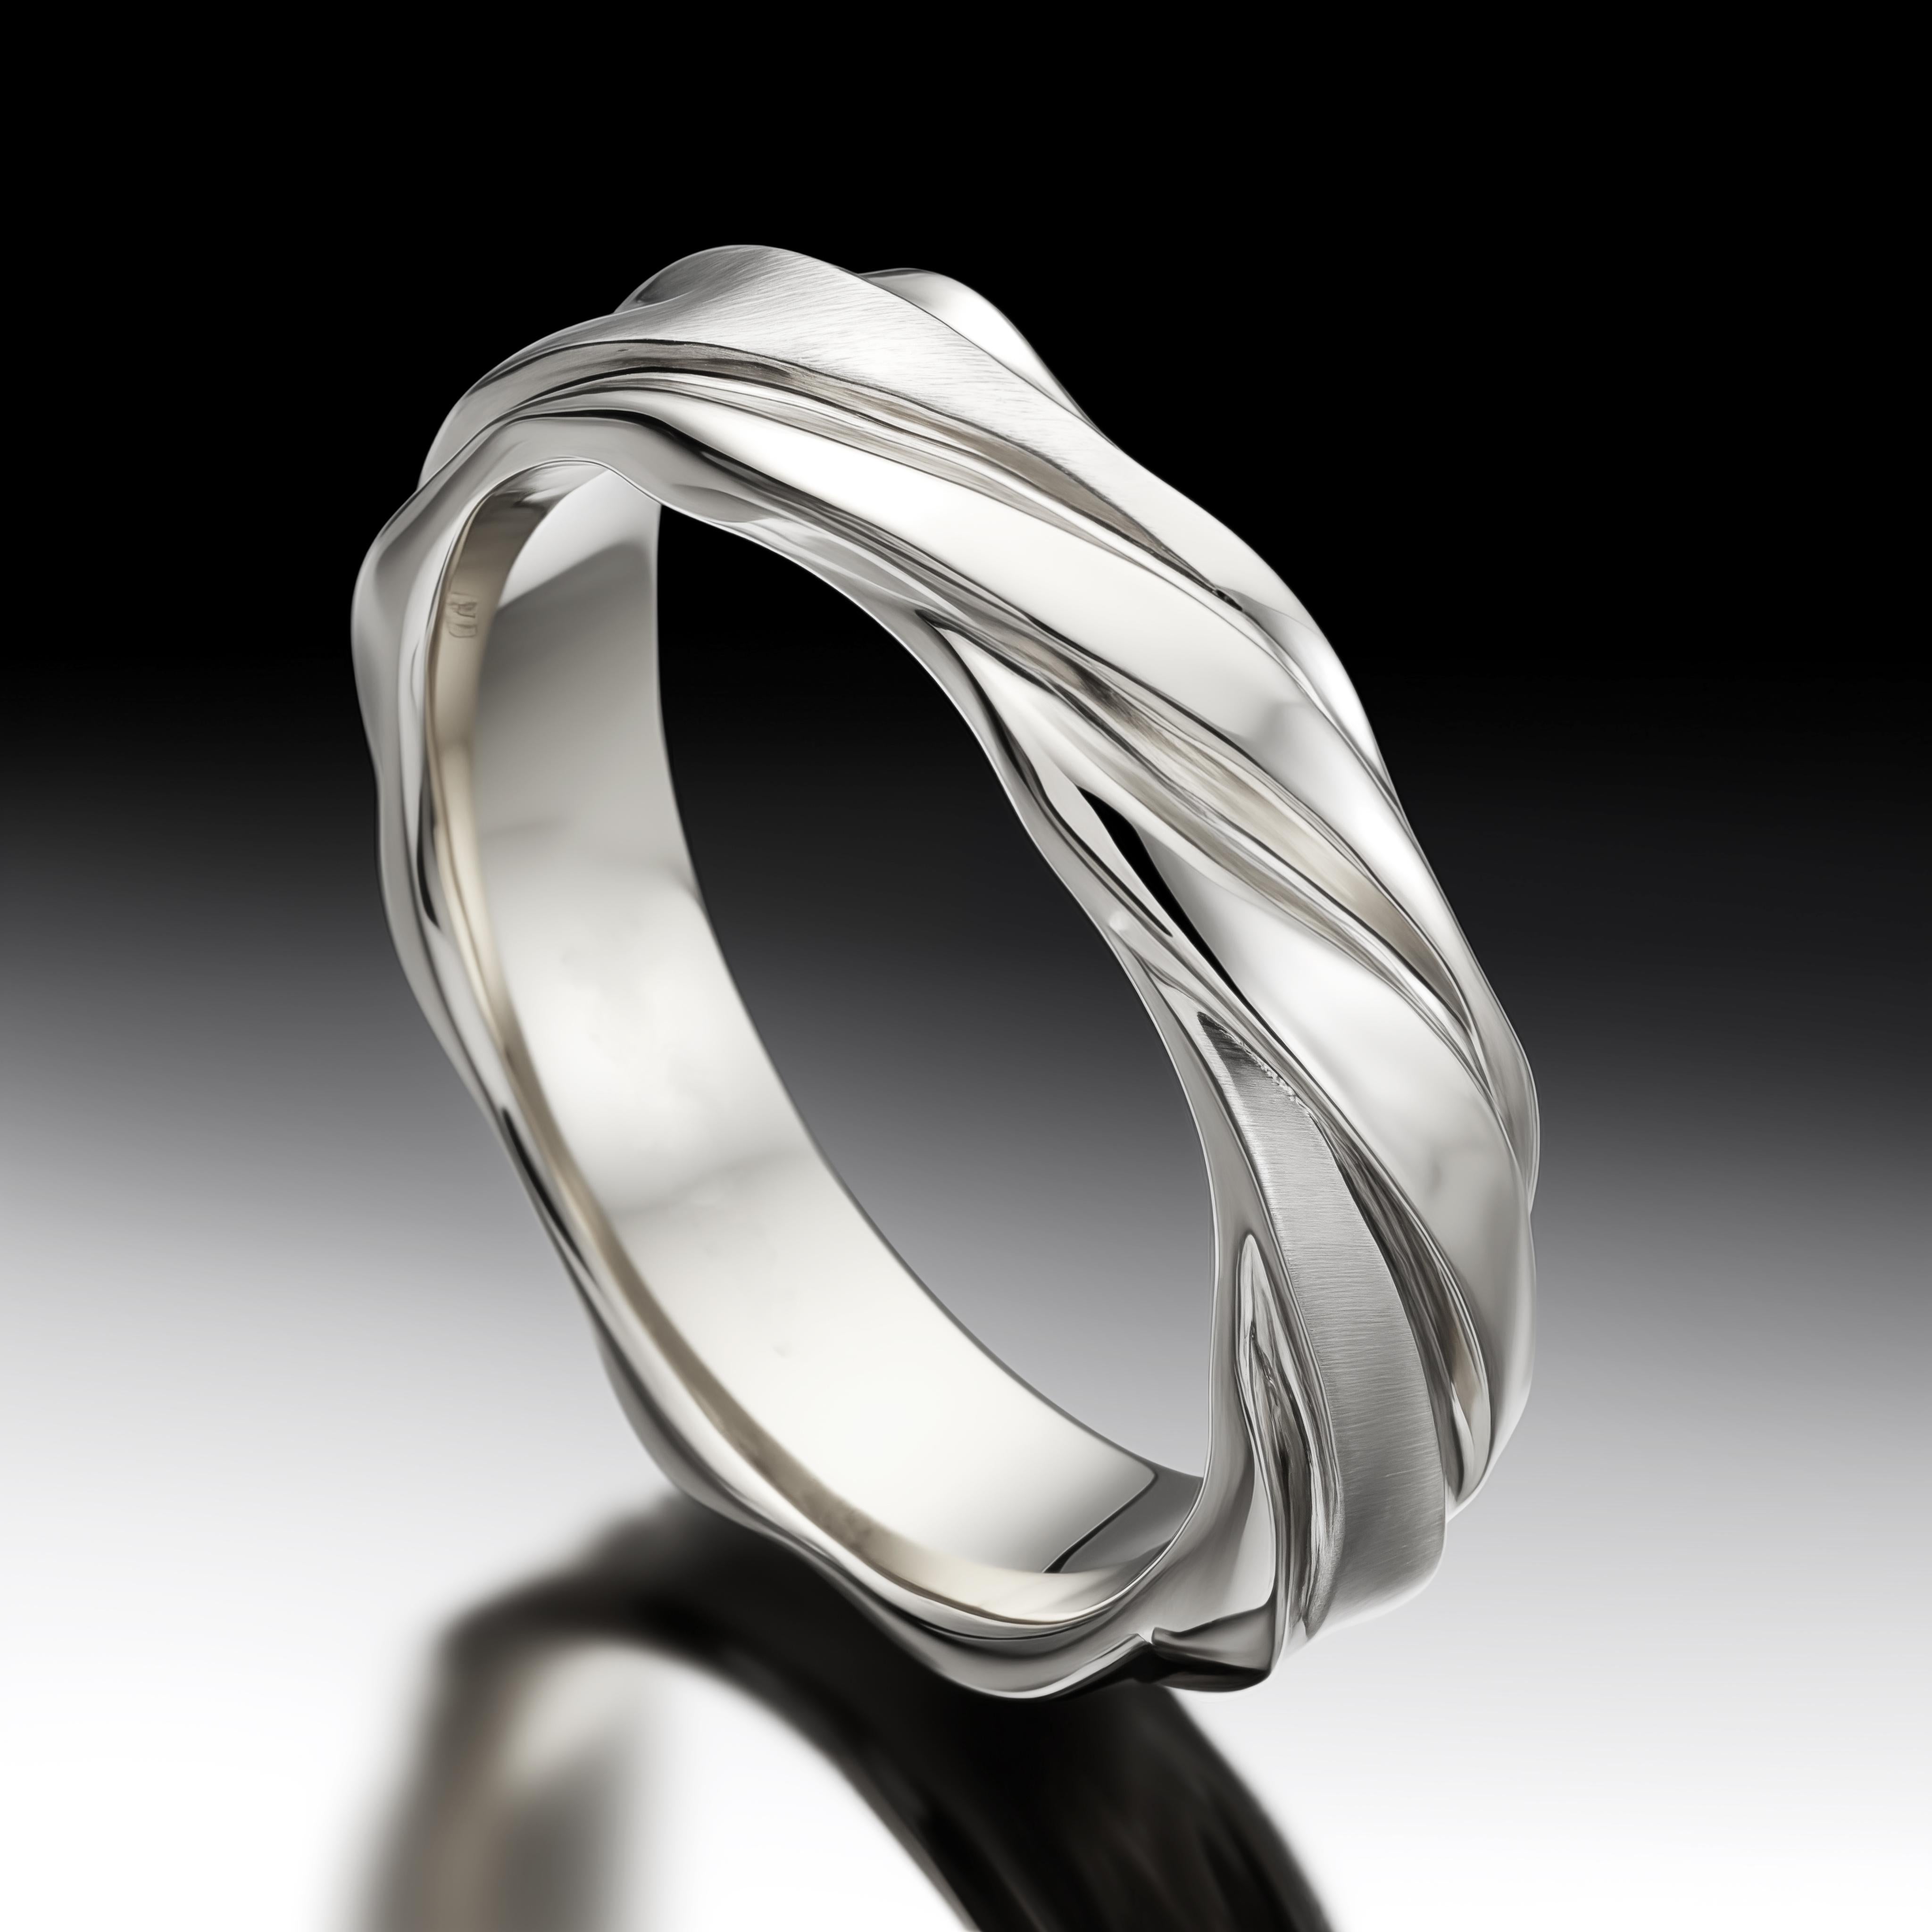 This wedding ring is made of 18 karat white gold and has a sculptural shape. Width: 3-4 mm. The ring can be personalized with a name or a saying. Each ring has a unique, slightly different shape. Please allow us time to customize the ring.
The ring